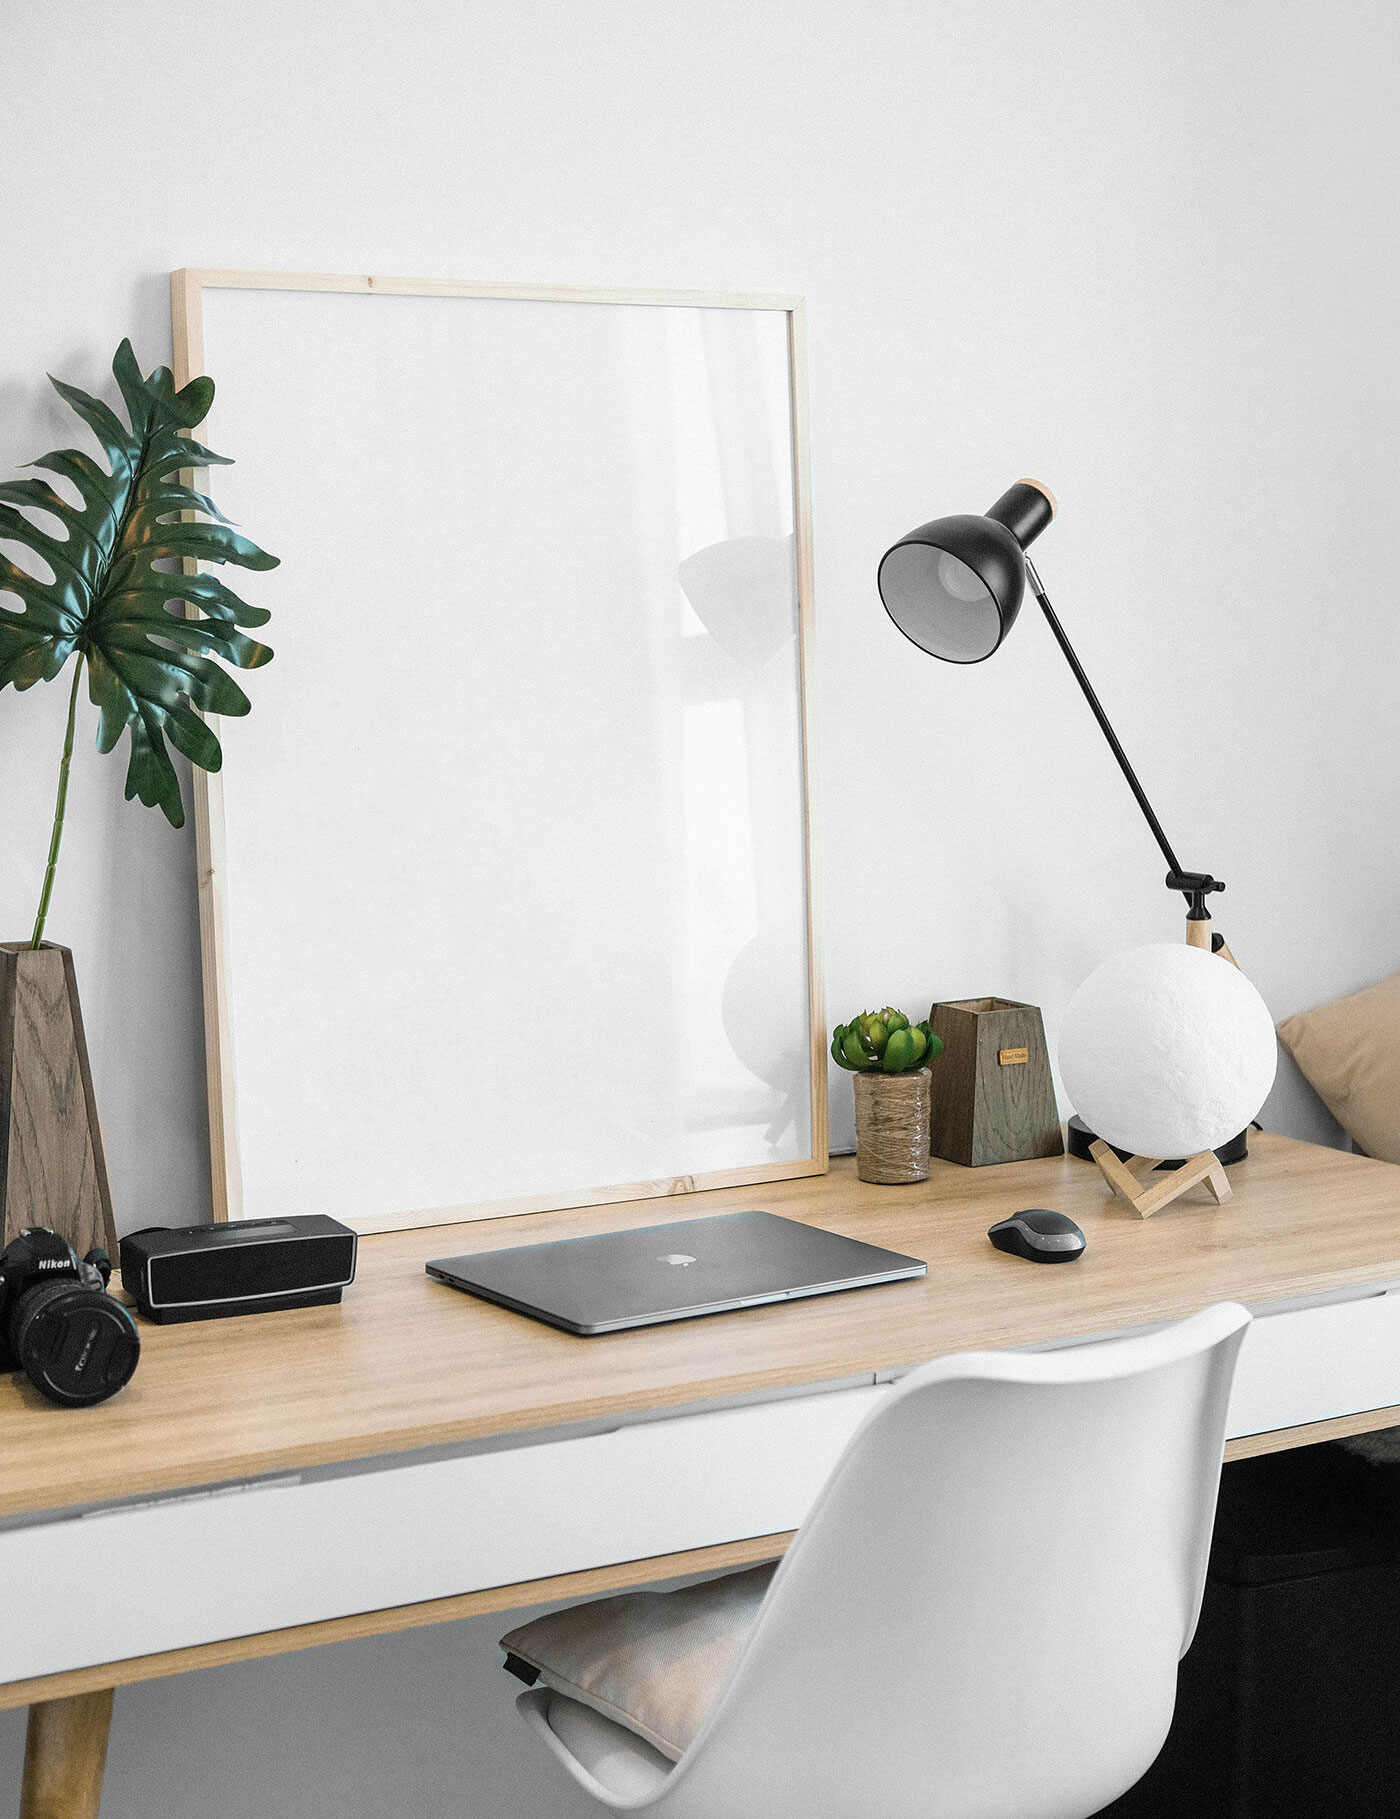 Picture Frame On Desk Mockup With Lamp And Laptop FREE PSD